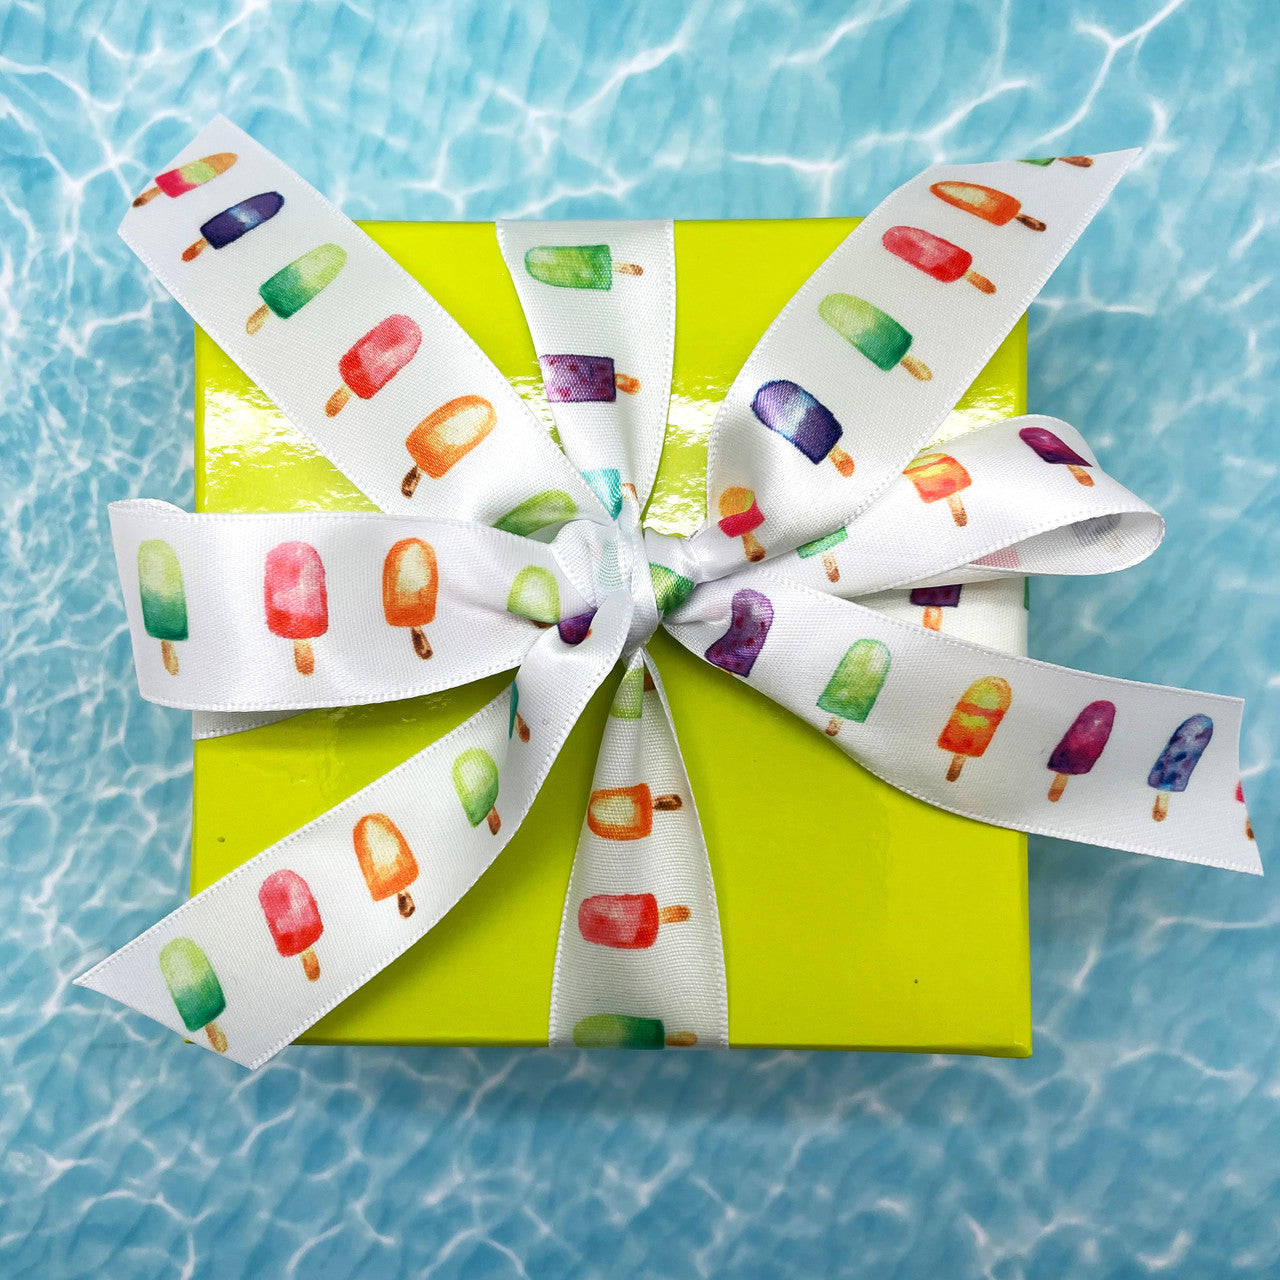 A Summer hostess gift is oh so cool tied with our popsicle ribbon!